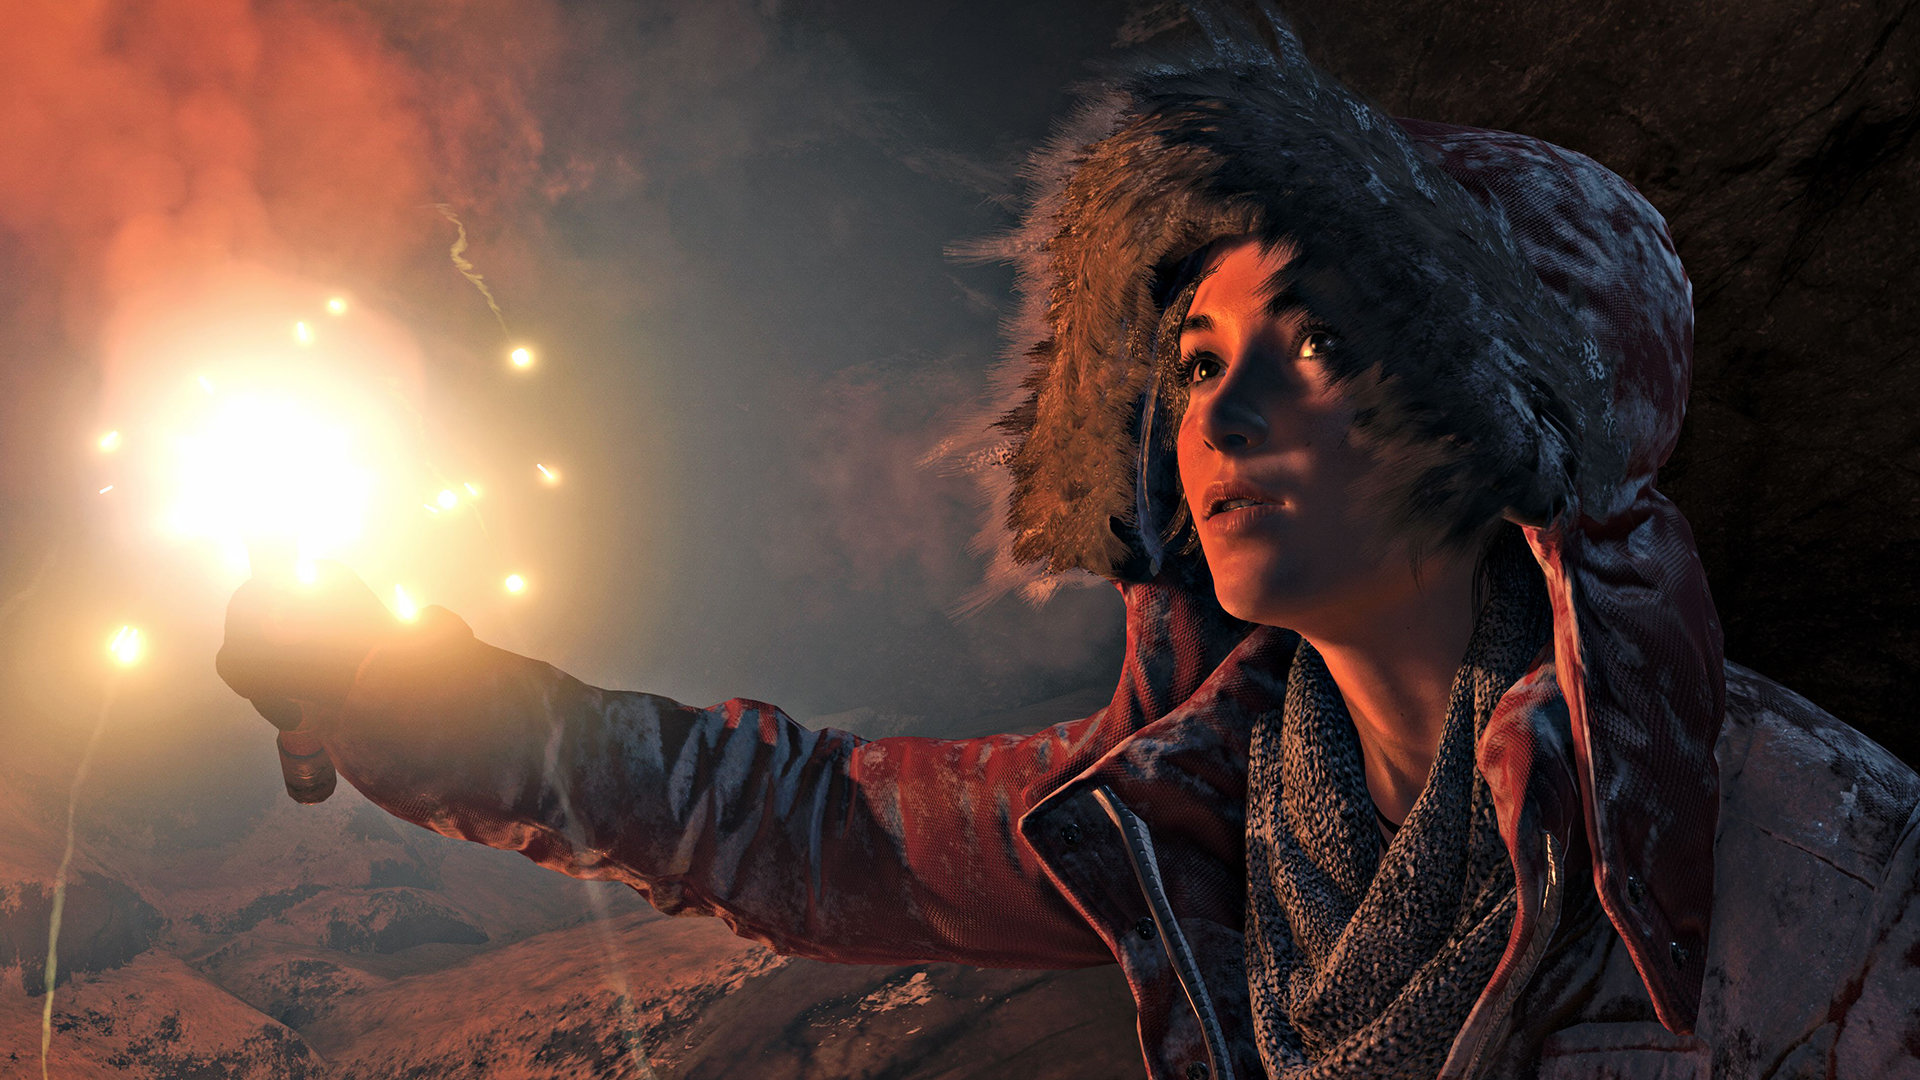 Best Rise Of The Tomb Raider wallpaper ID:83914 for High Resolution full hd 1080p computer